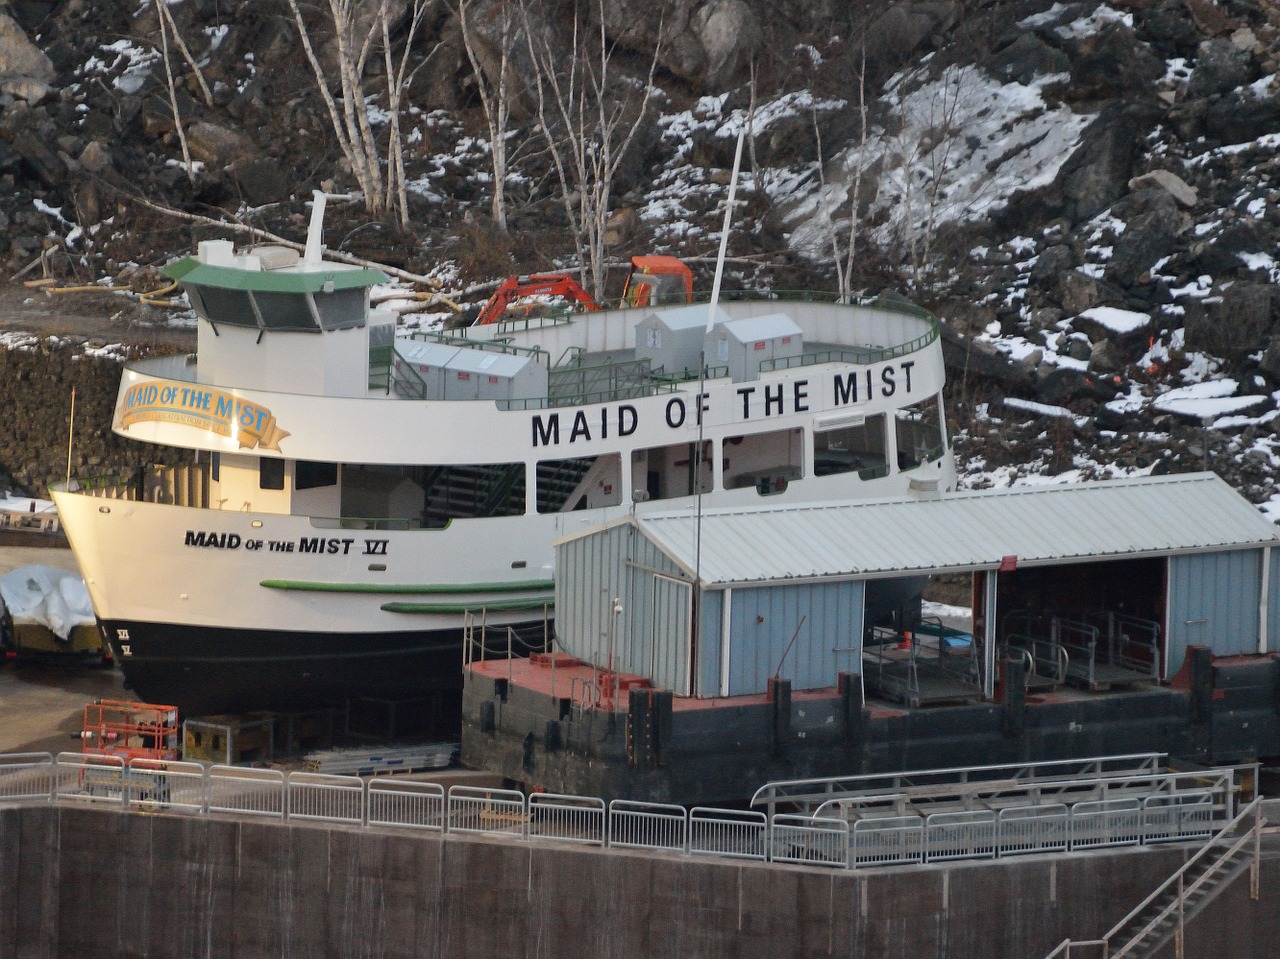 maid of the mist tour boat winter storage free photo